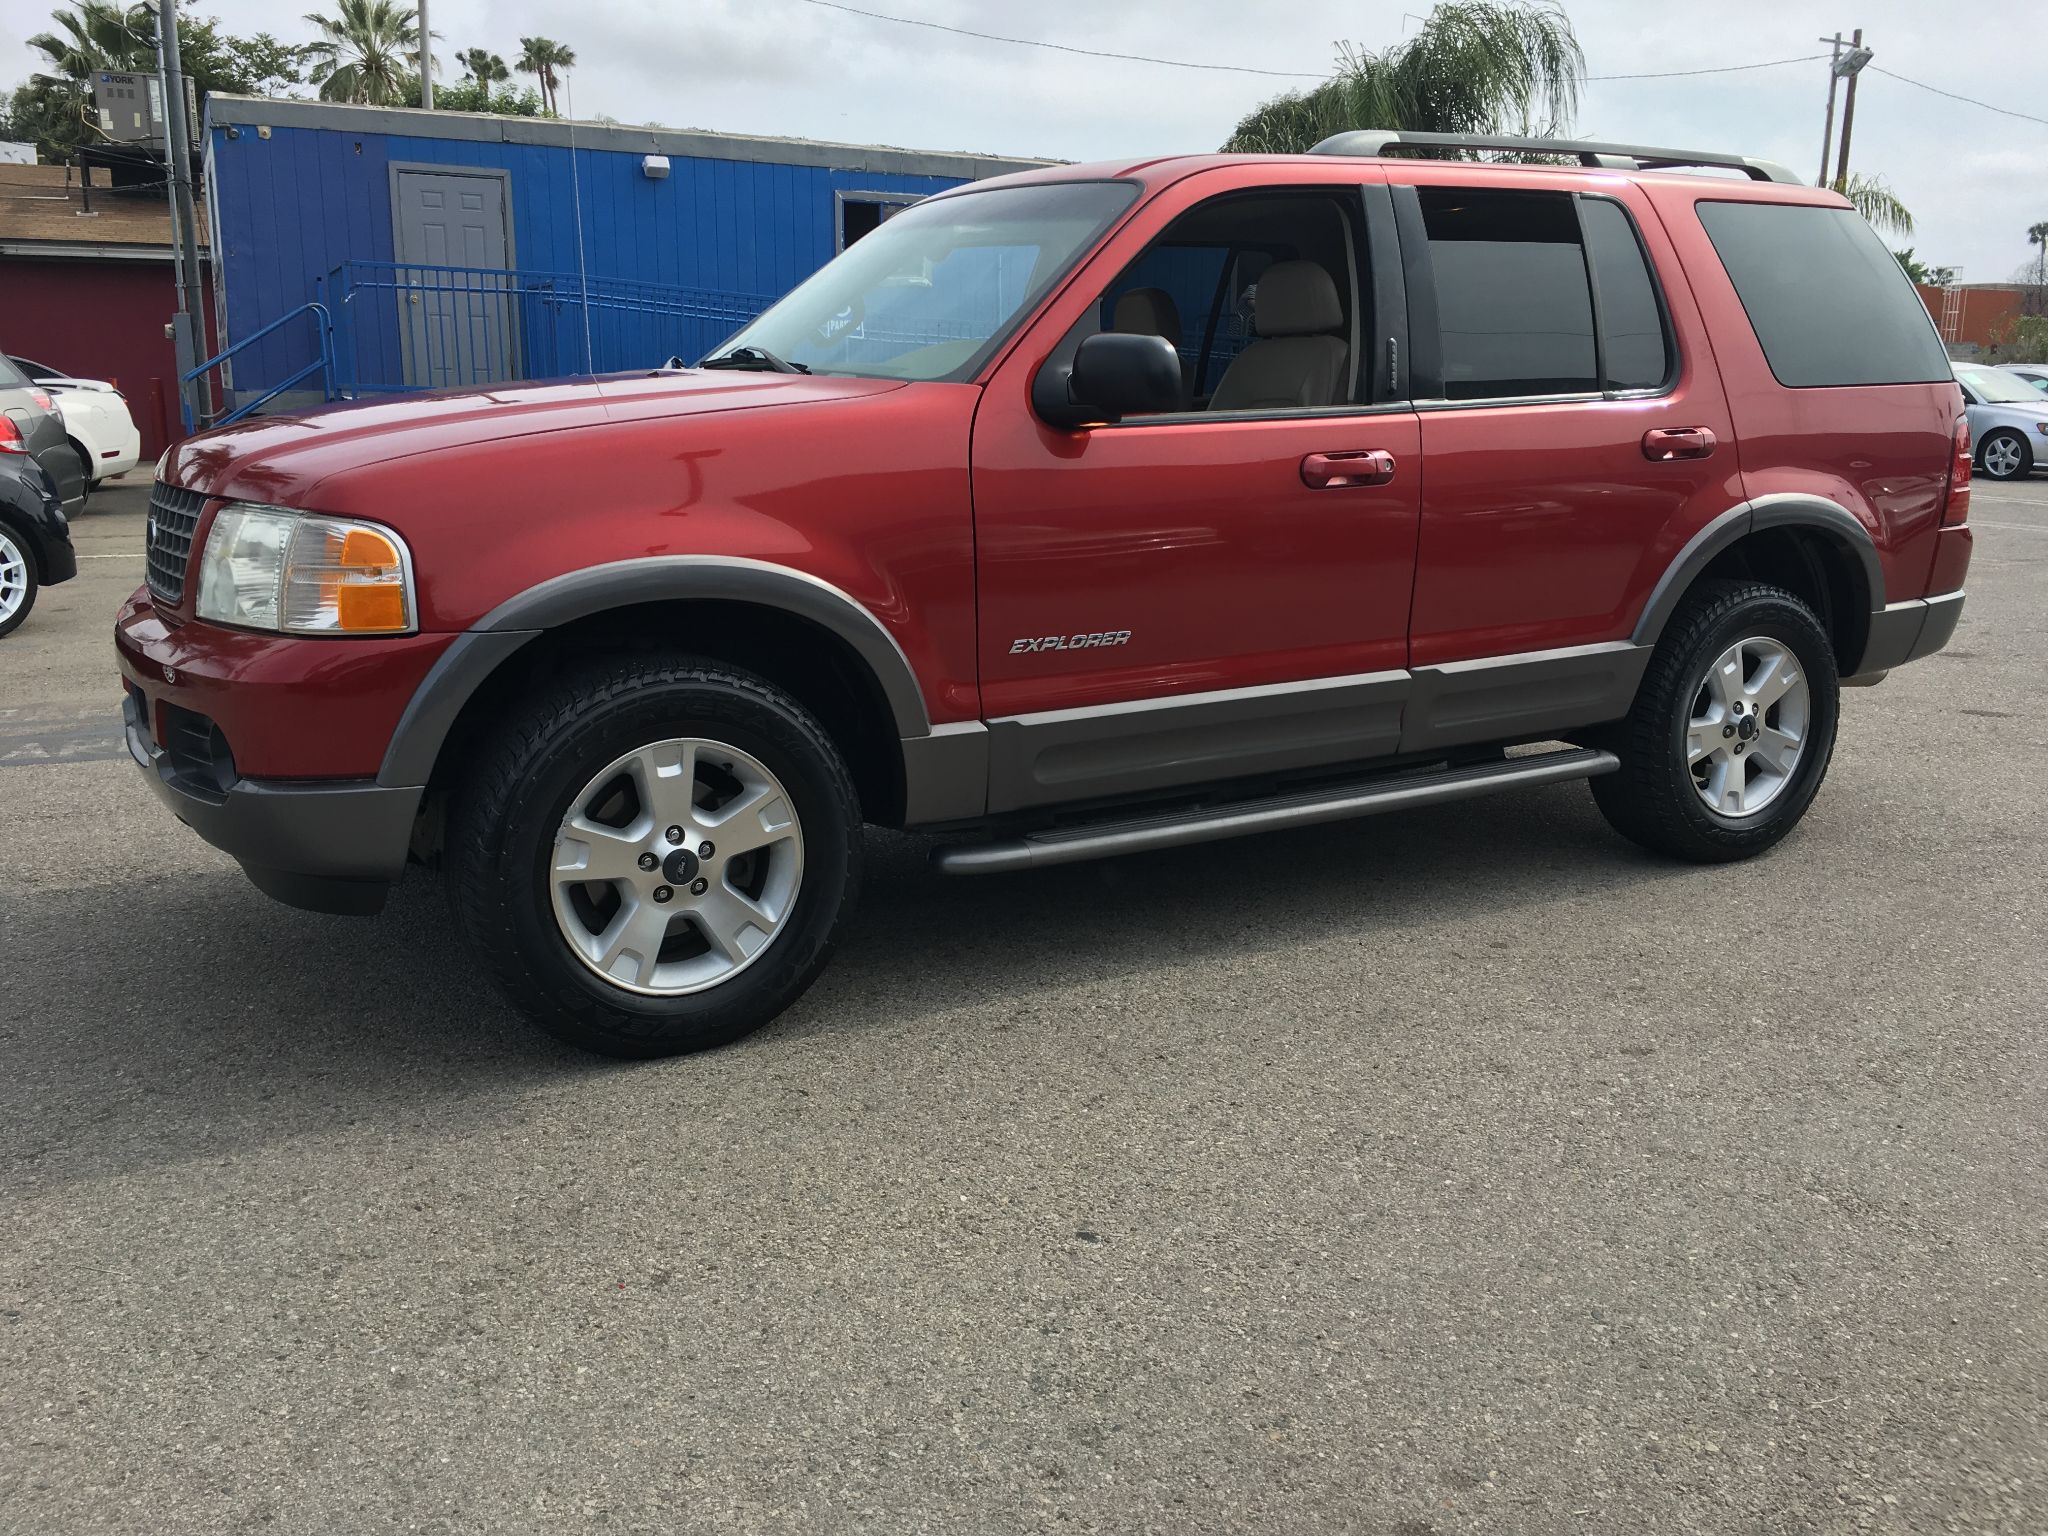 Used 2002 Ford Explorer XLT at City Cars Warehouse INC